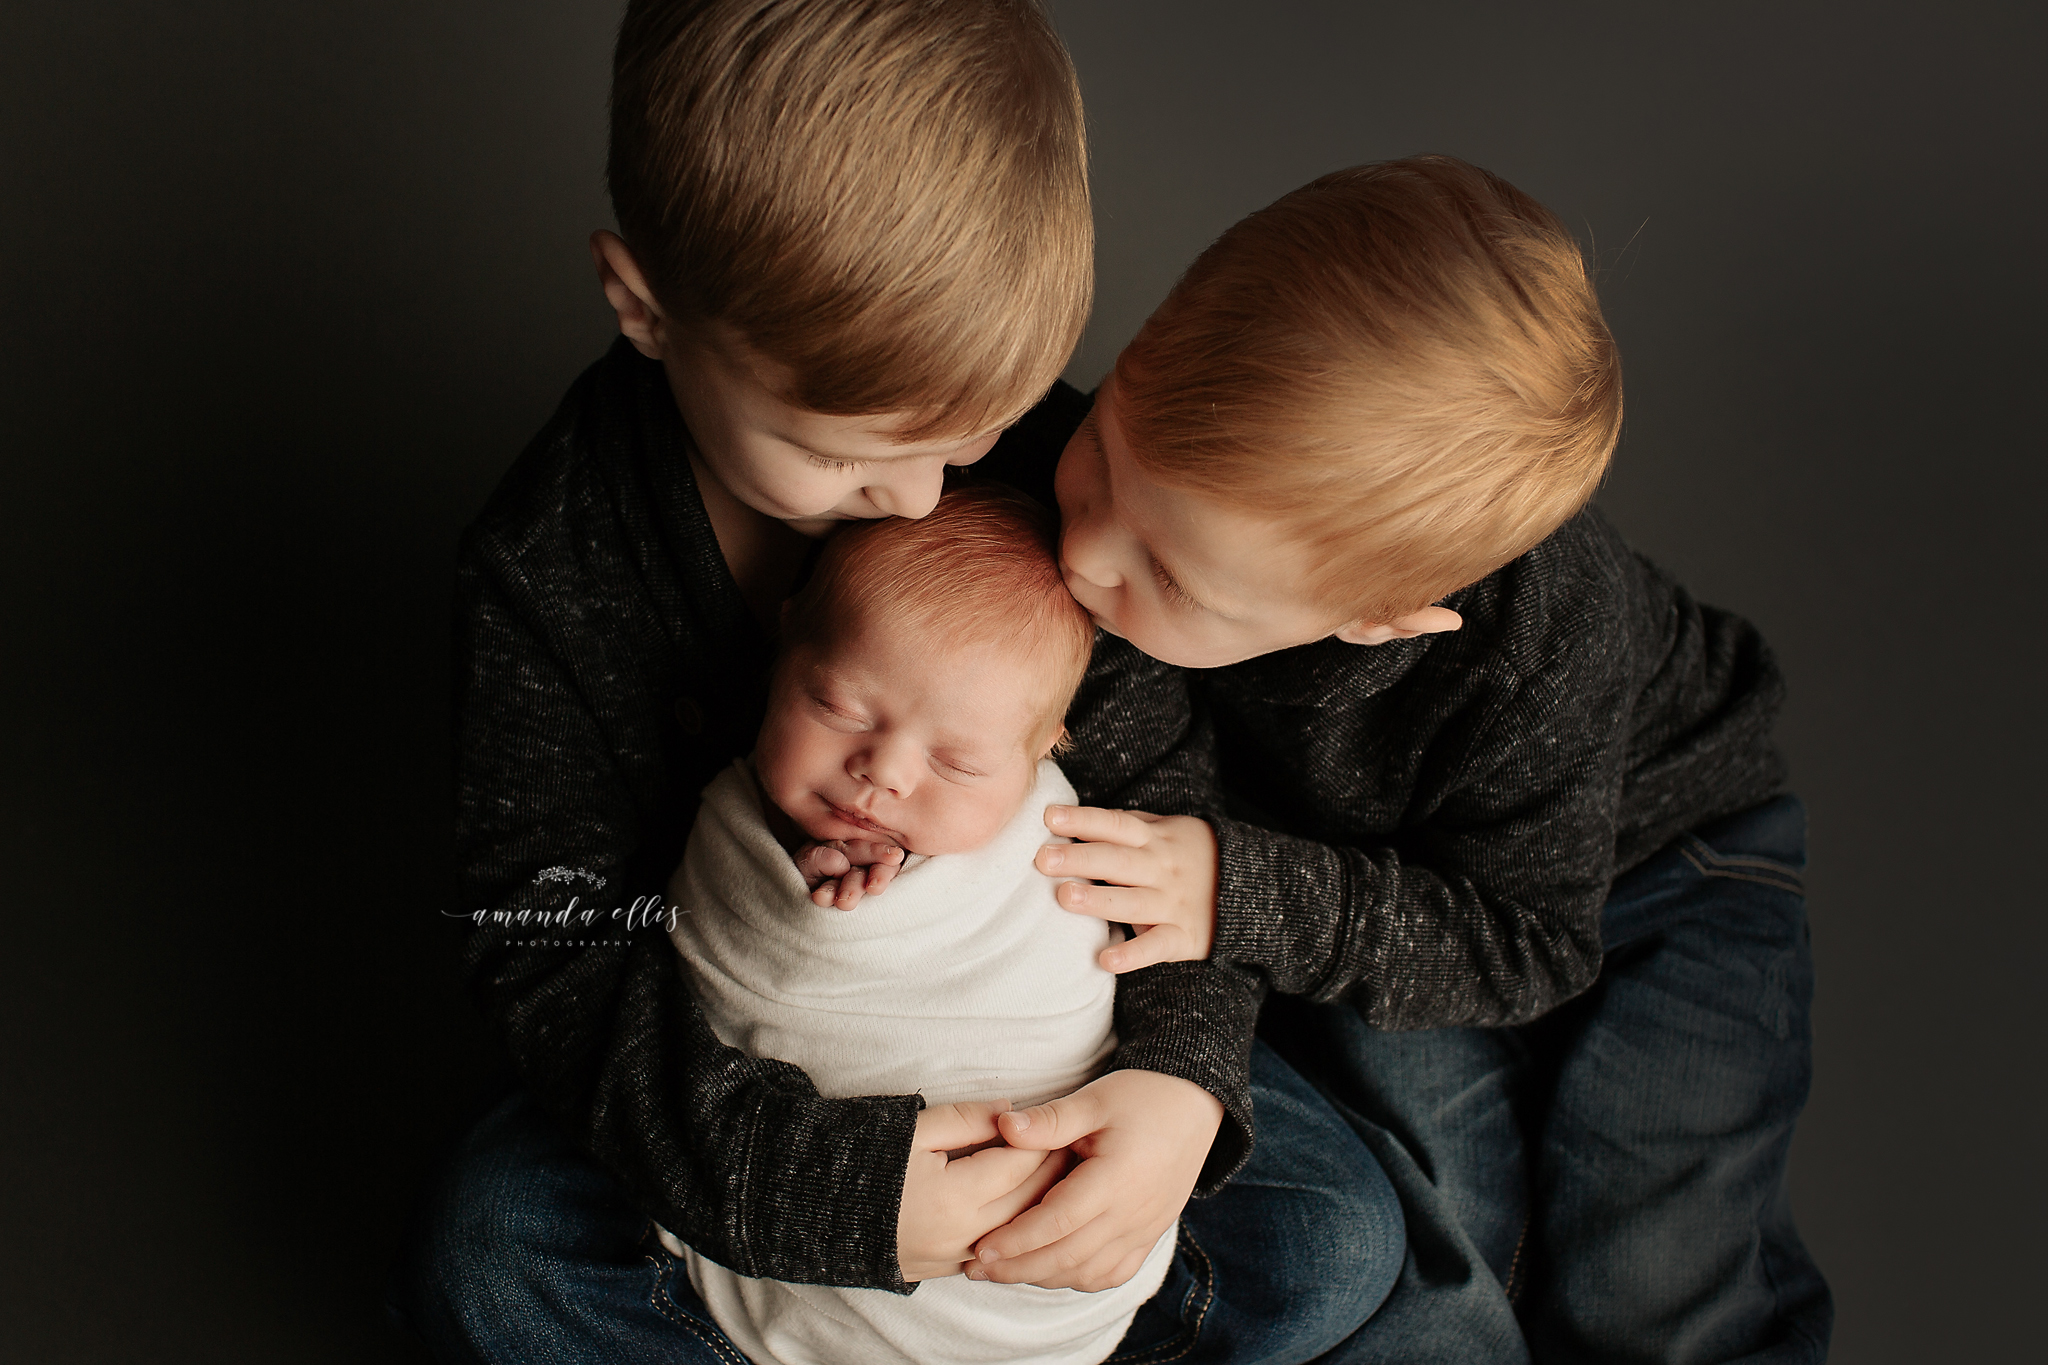 big brothers loving on their new baby brother